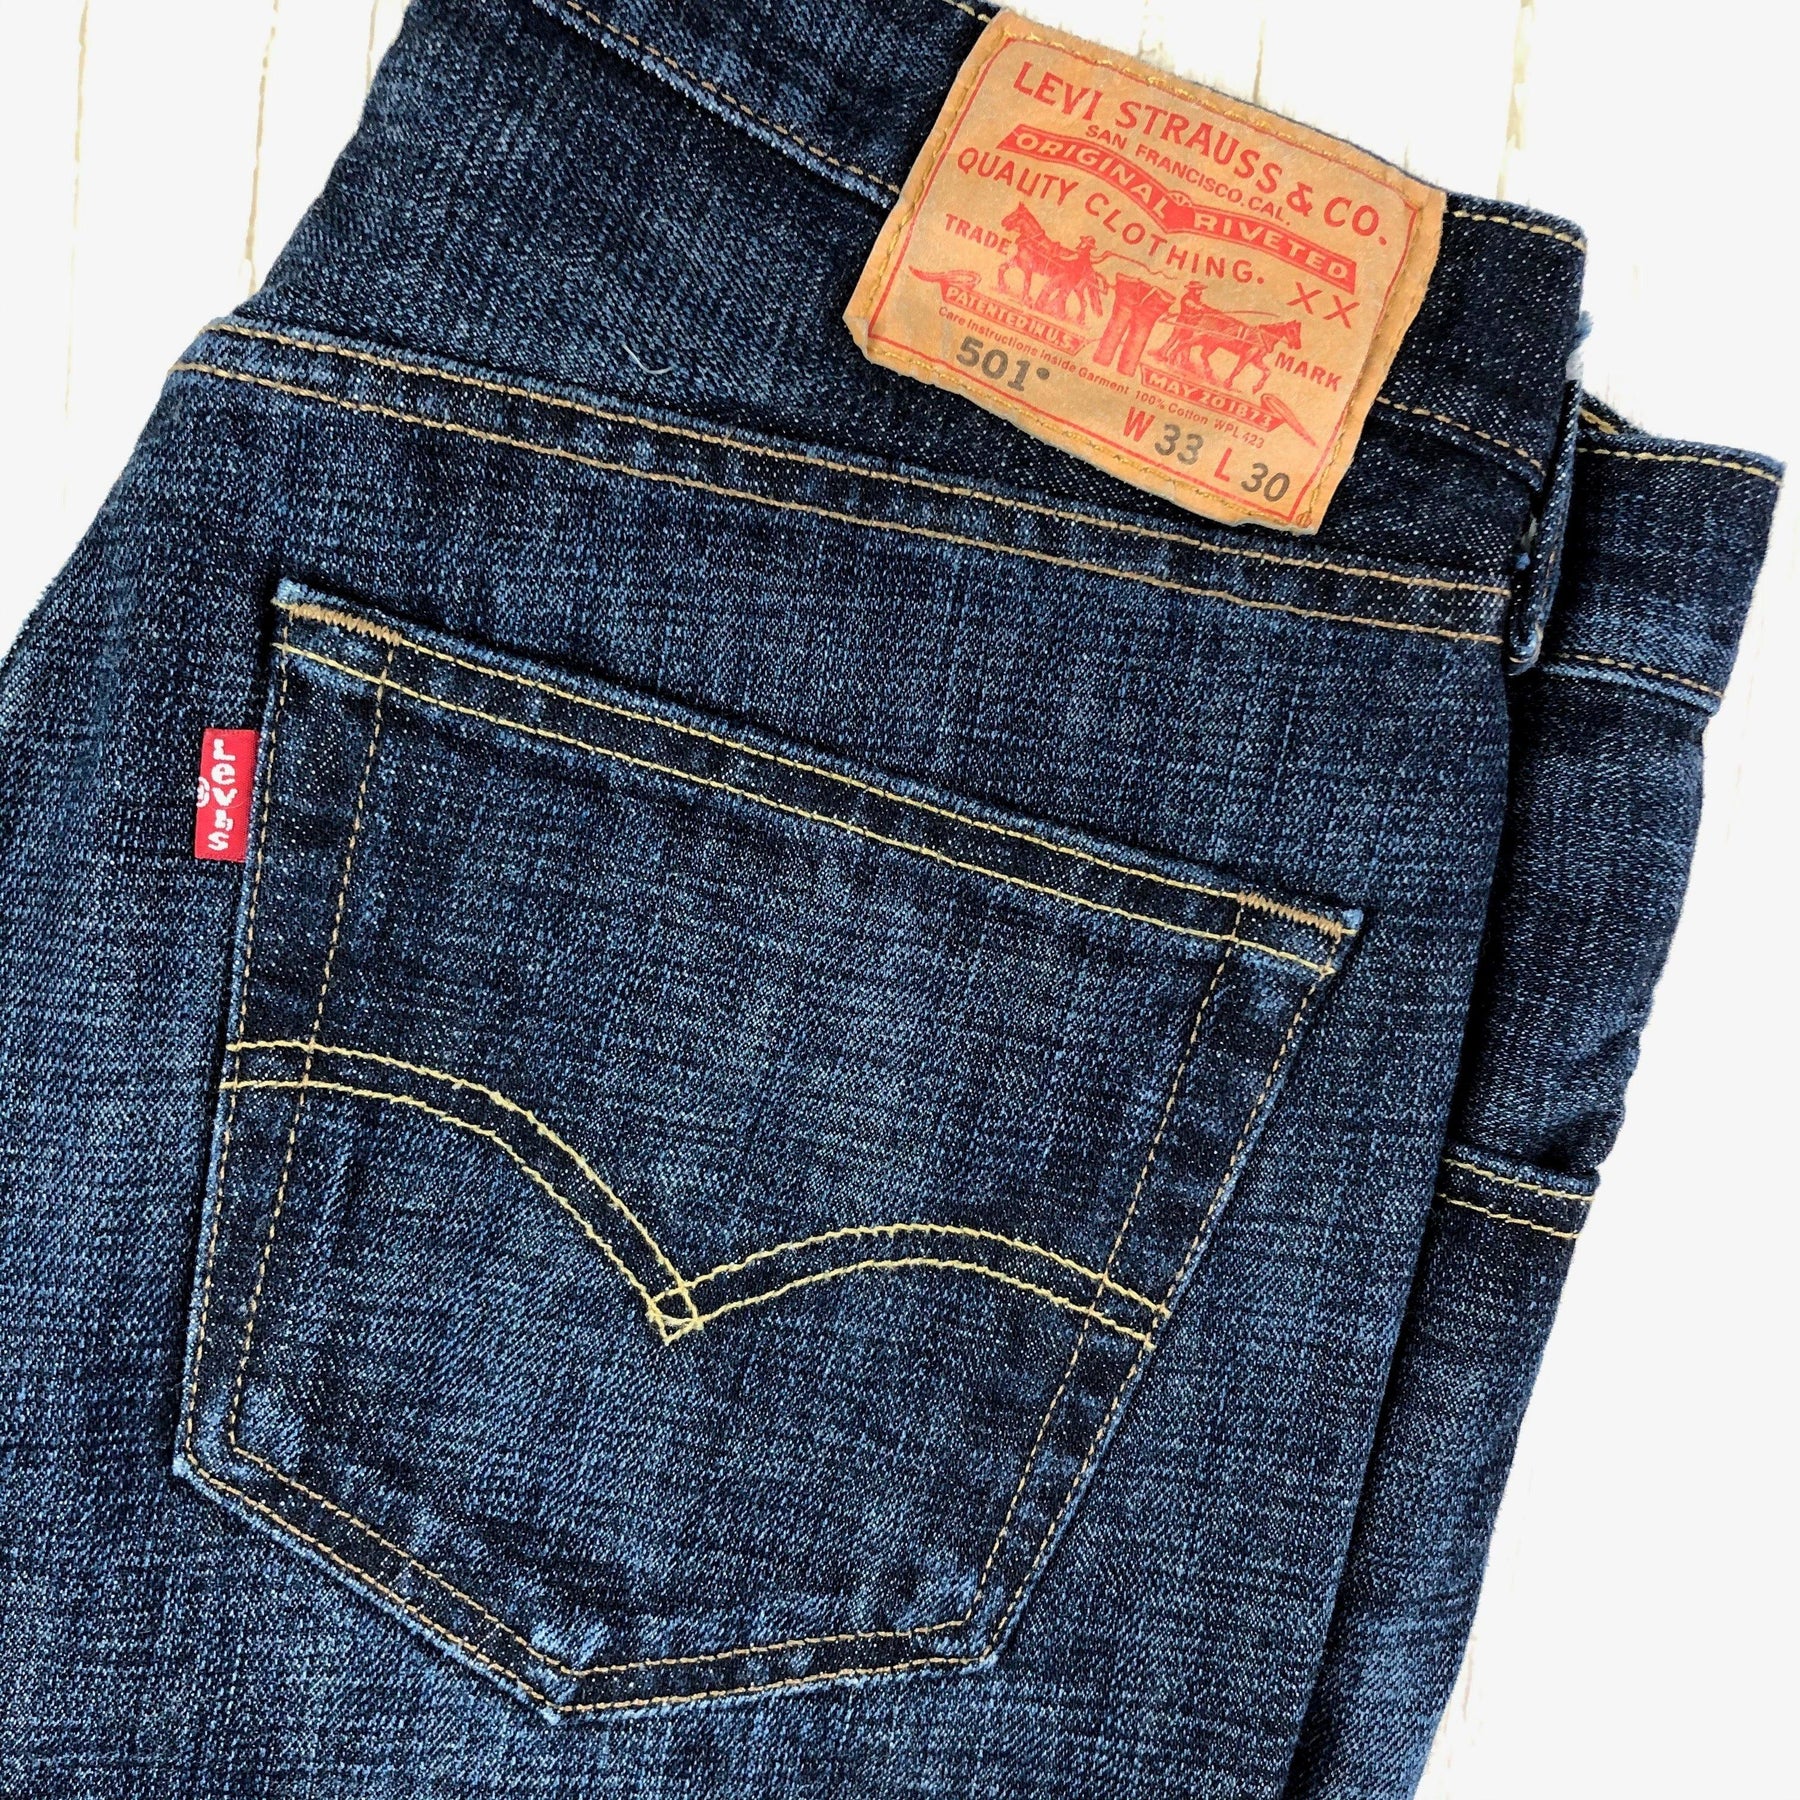 Dark Wash Mens Levis 501 Button Fly Jeans -Size 33/30 – Jean Pool